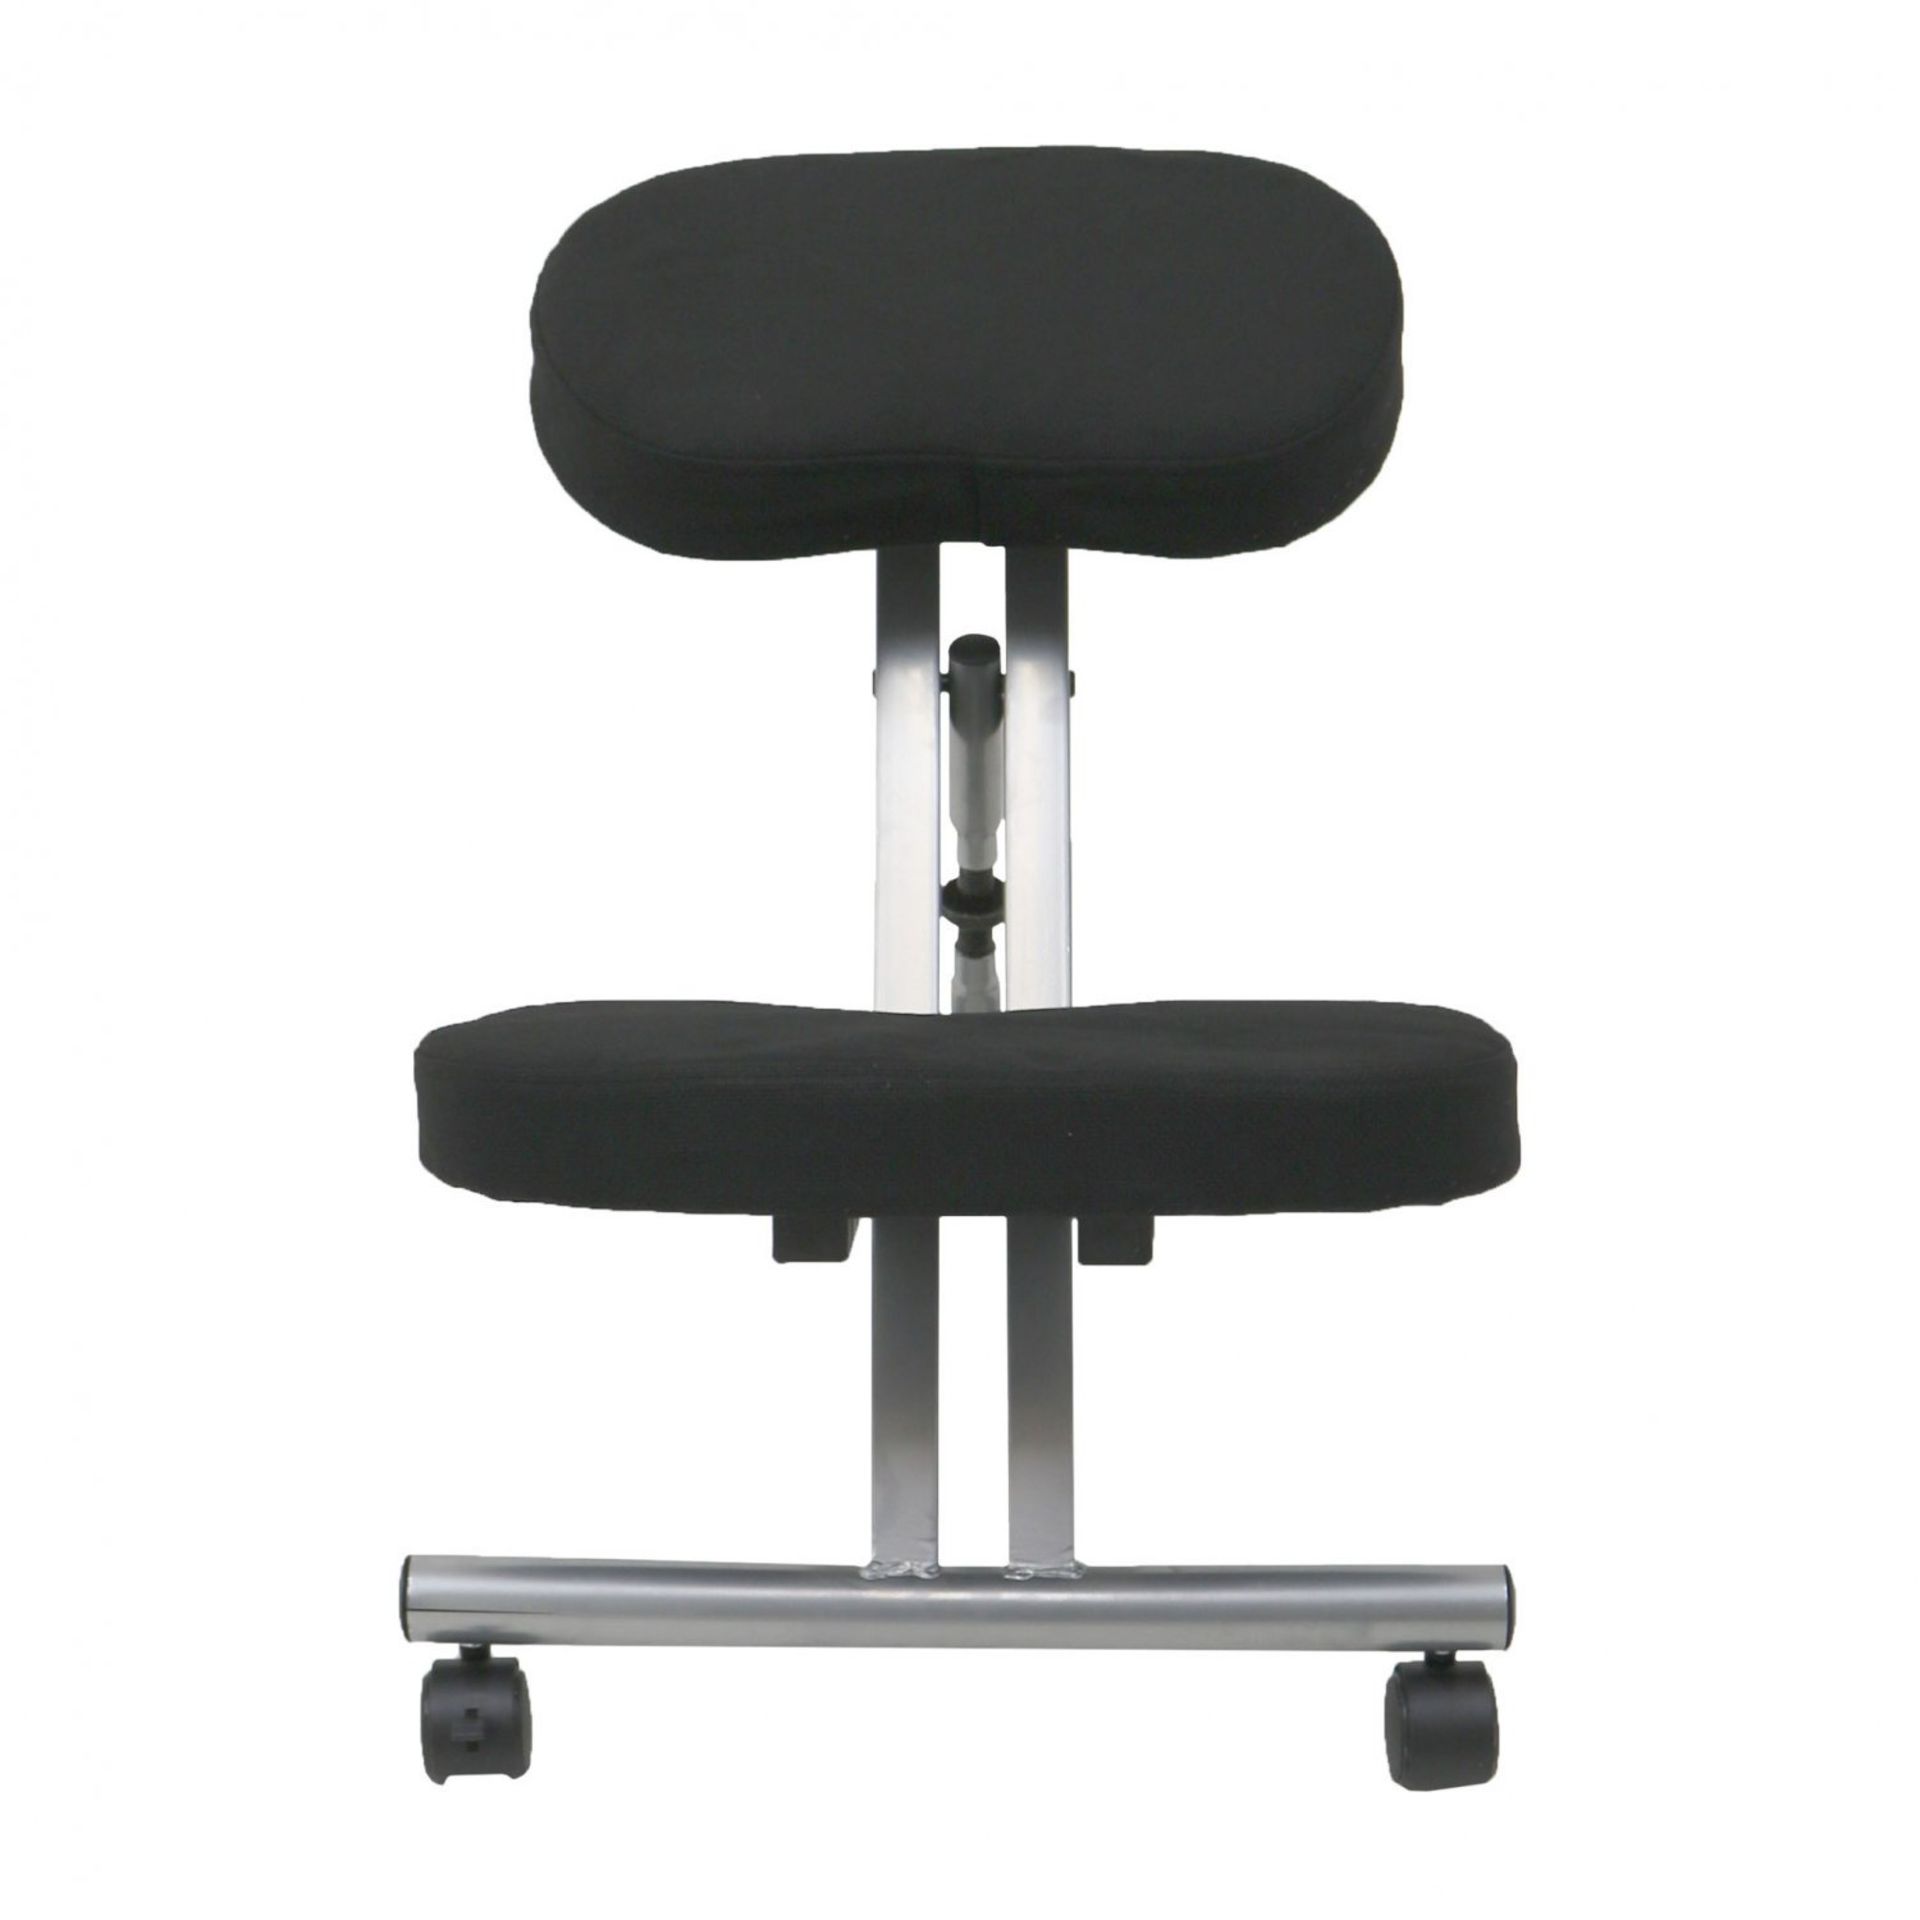 (SP514) Kneeling Chair The kneeling chair is ideal for both home and office use. The unique ... - Image 2 of 2